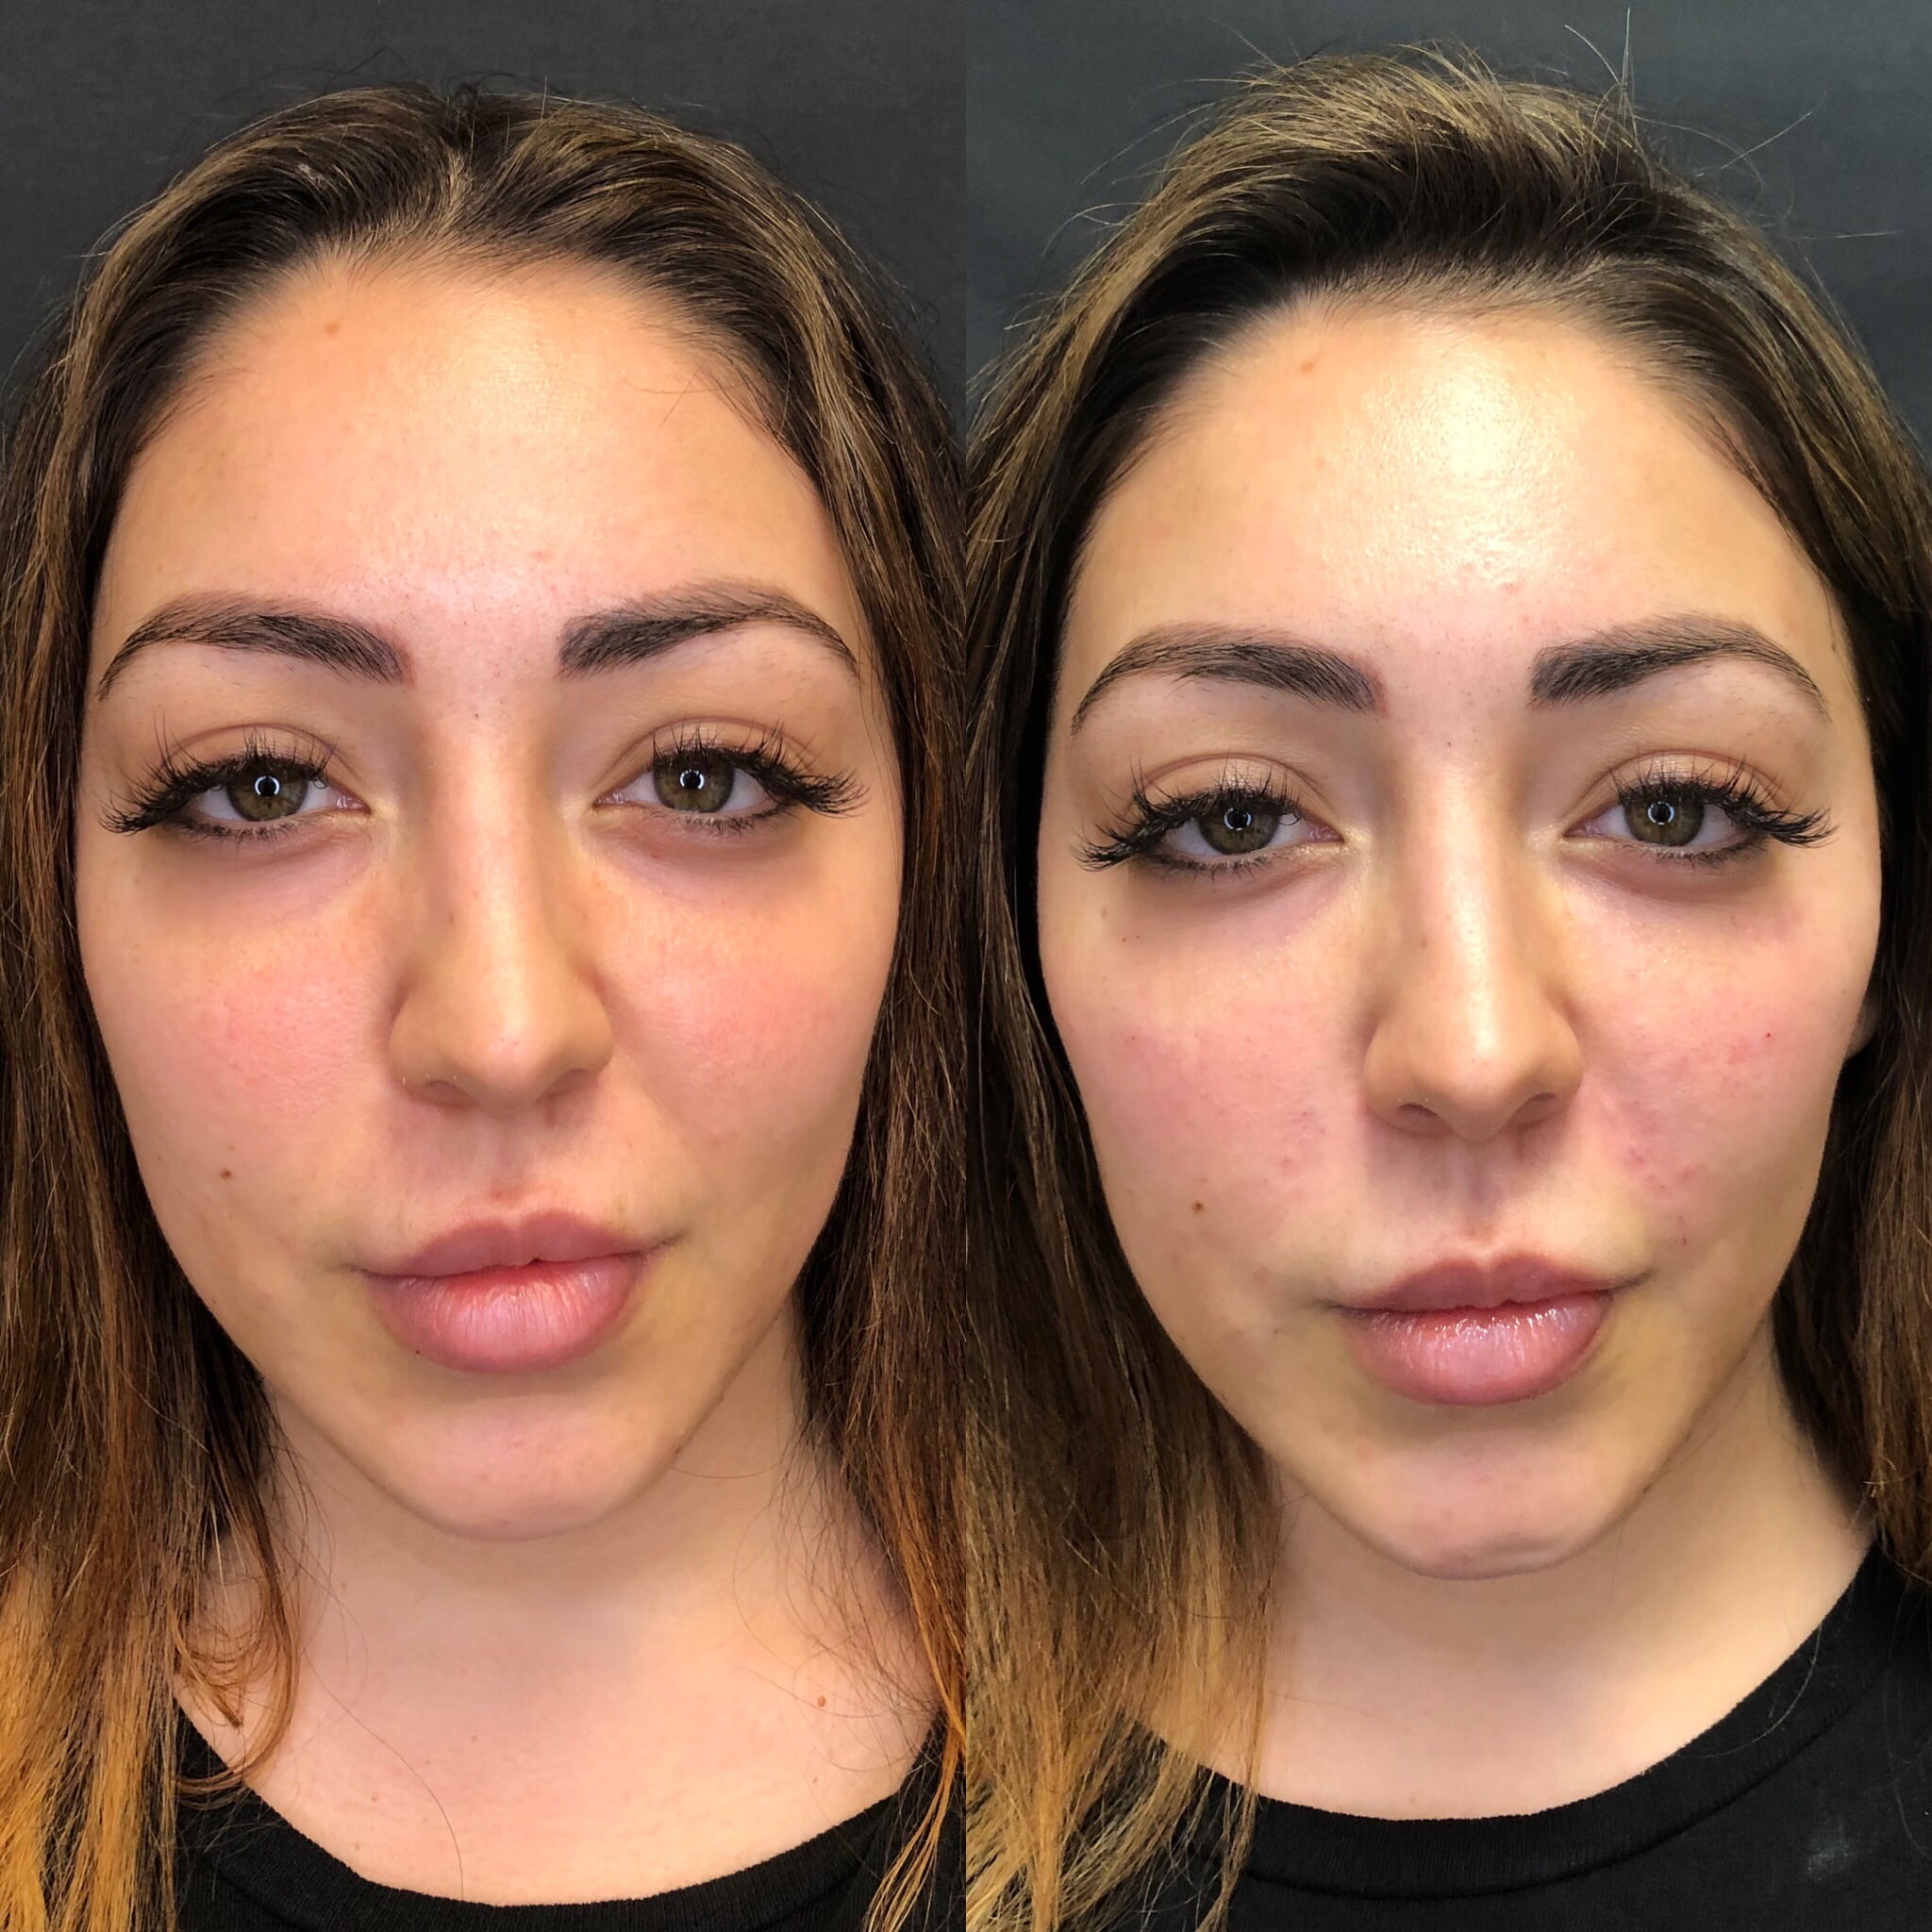 Before and After Cheeks treatment in Beauty Boost Med Spa at Newport Beach, CA